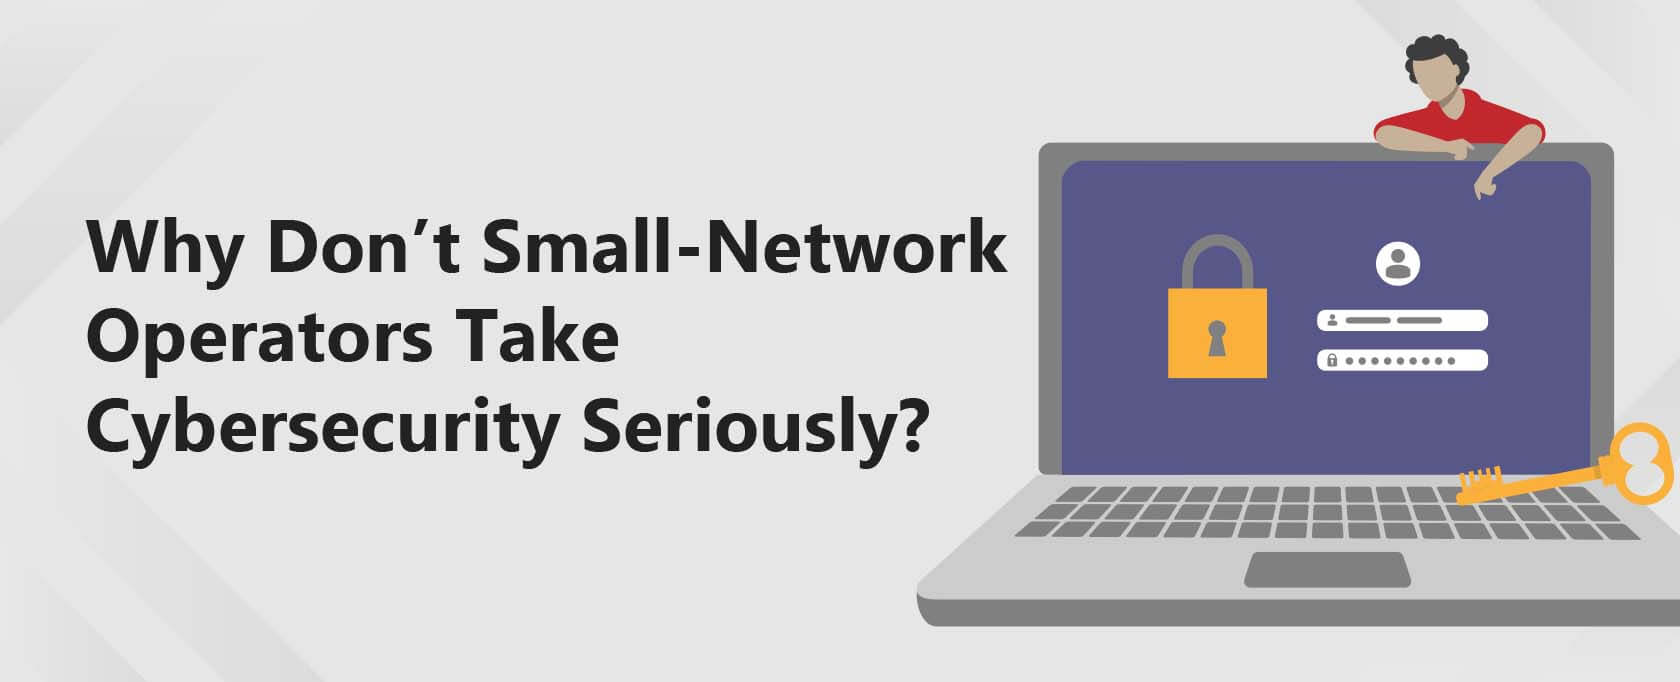 Why Don’t Small-Network Operators Take Cybersecurity Seriously?